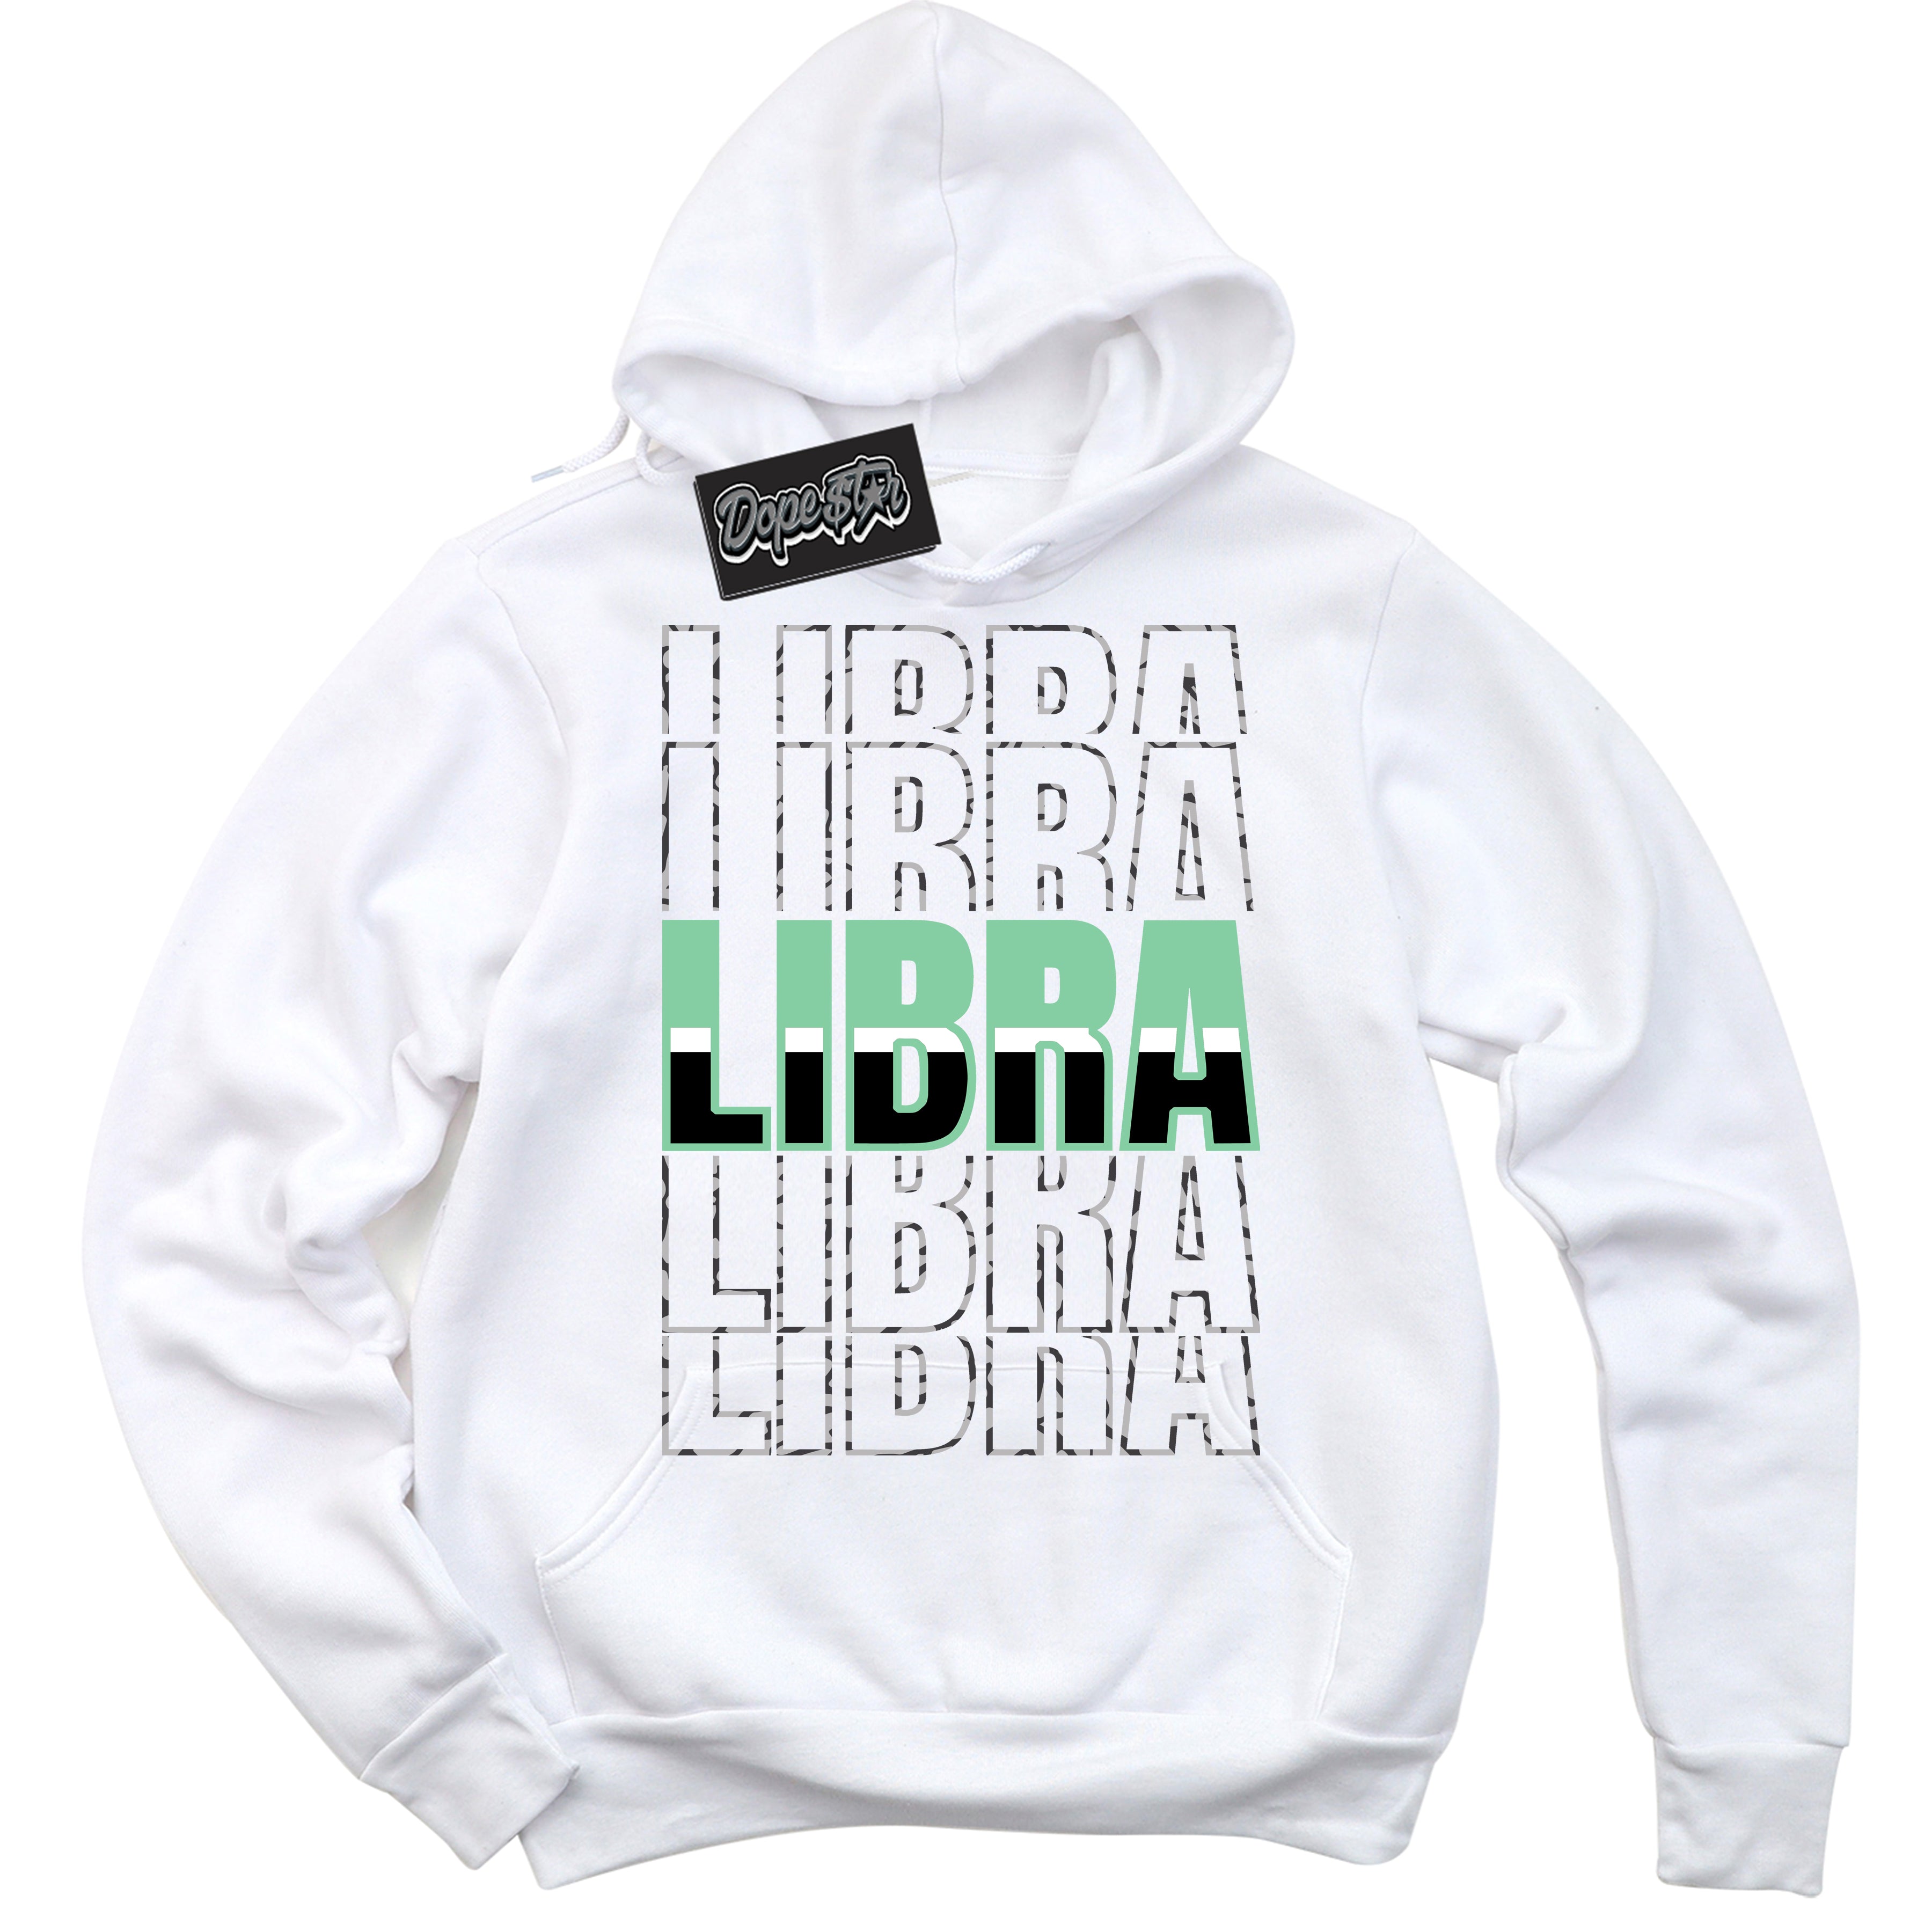 Cool White Graphic DopeStar Hoodie with “ Libra “ print, that perfectly matches Green Glow 3s sneakers